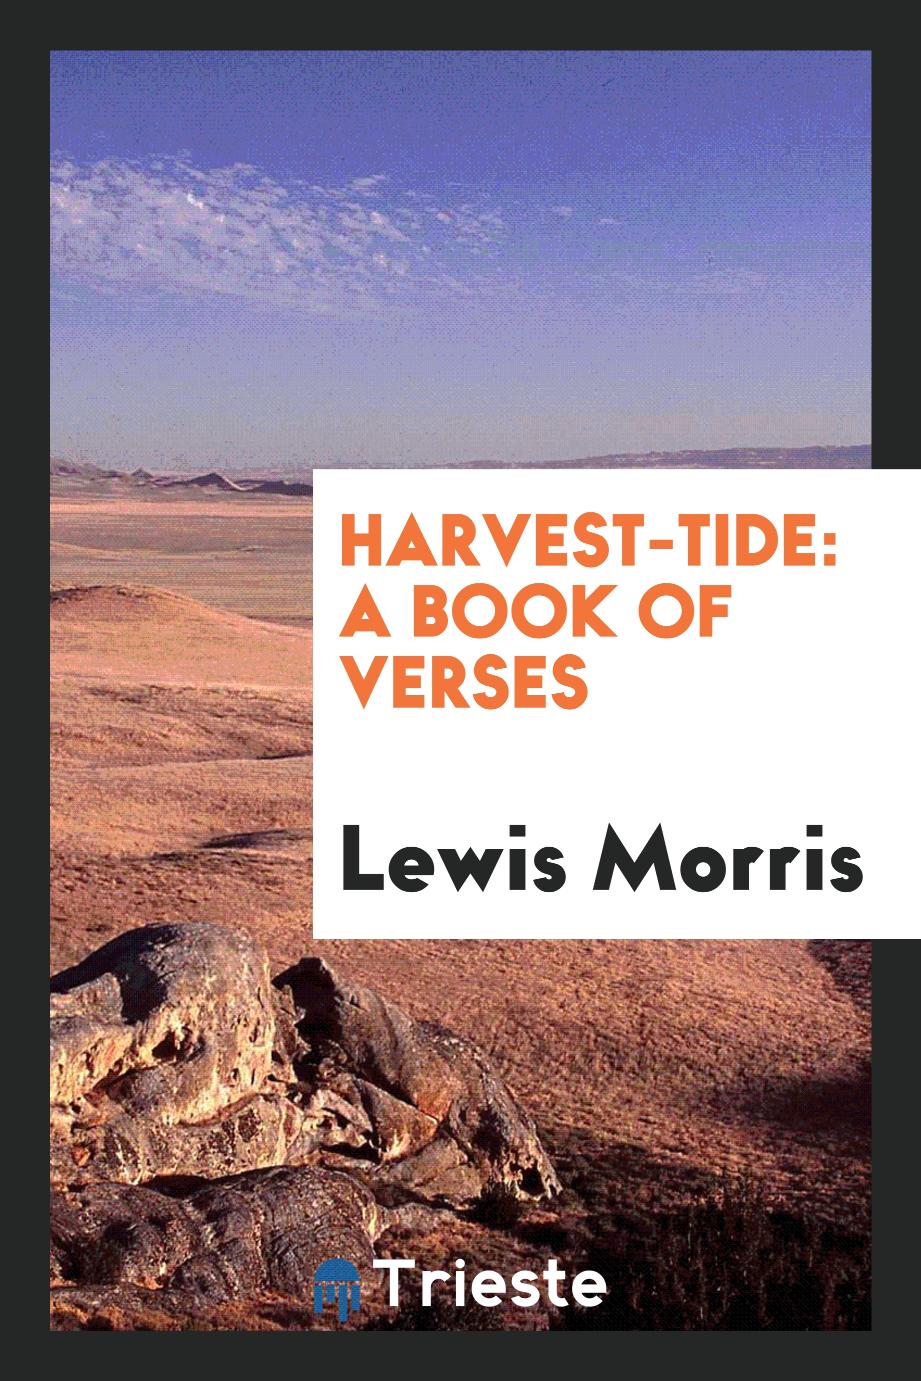 Harvest-Tide: A Book of Verses